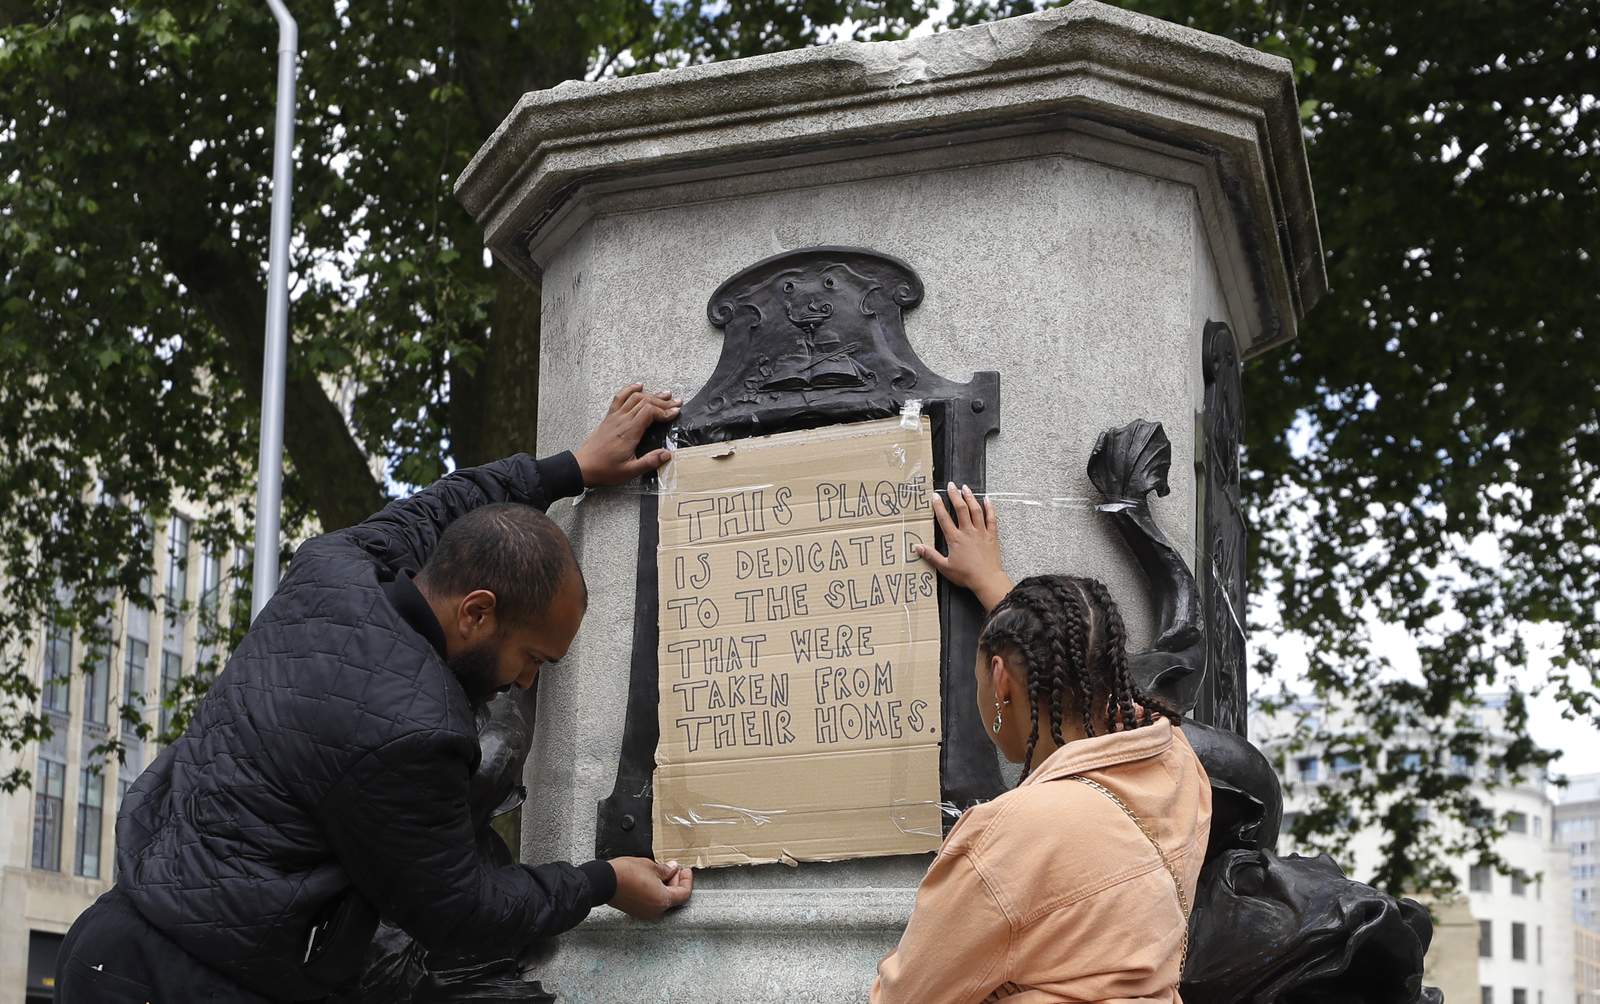 London mayor says statues of imperialists could be removed